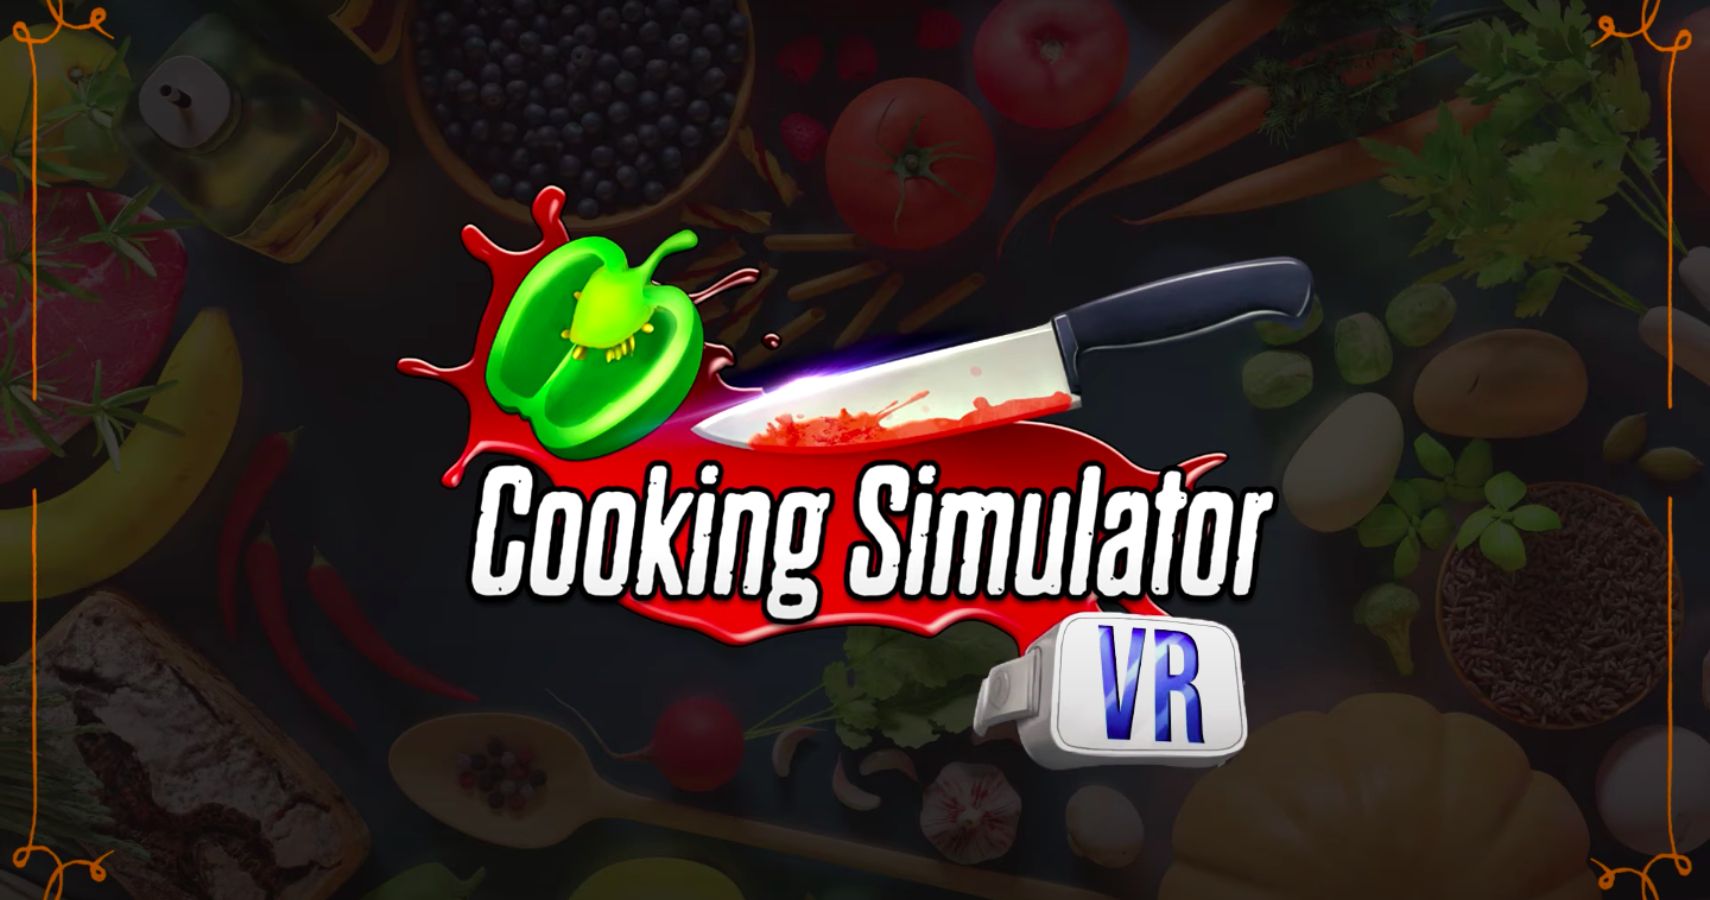 This VR Cooking Simulator is CRAZY! 